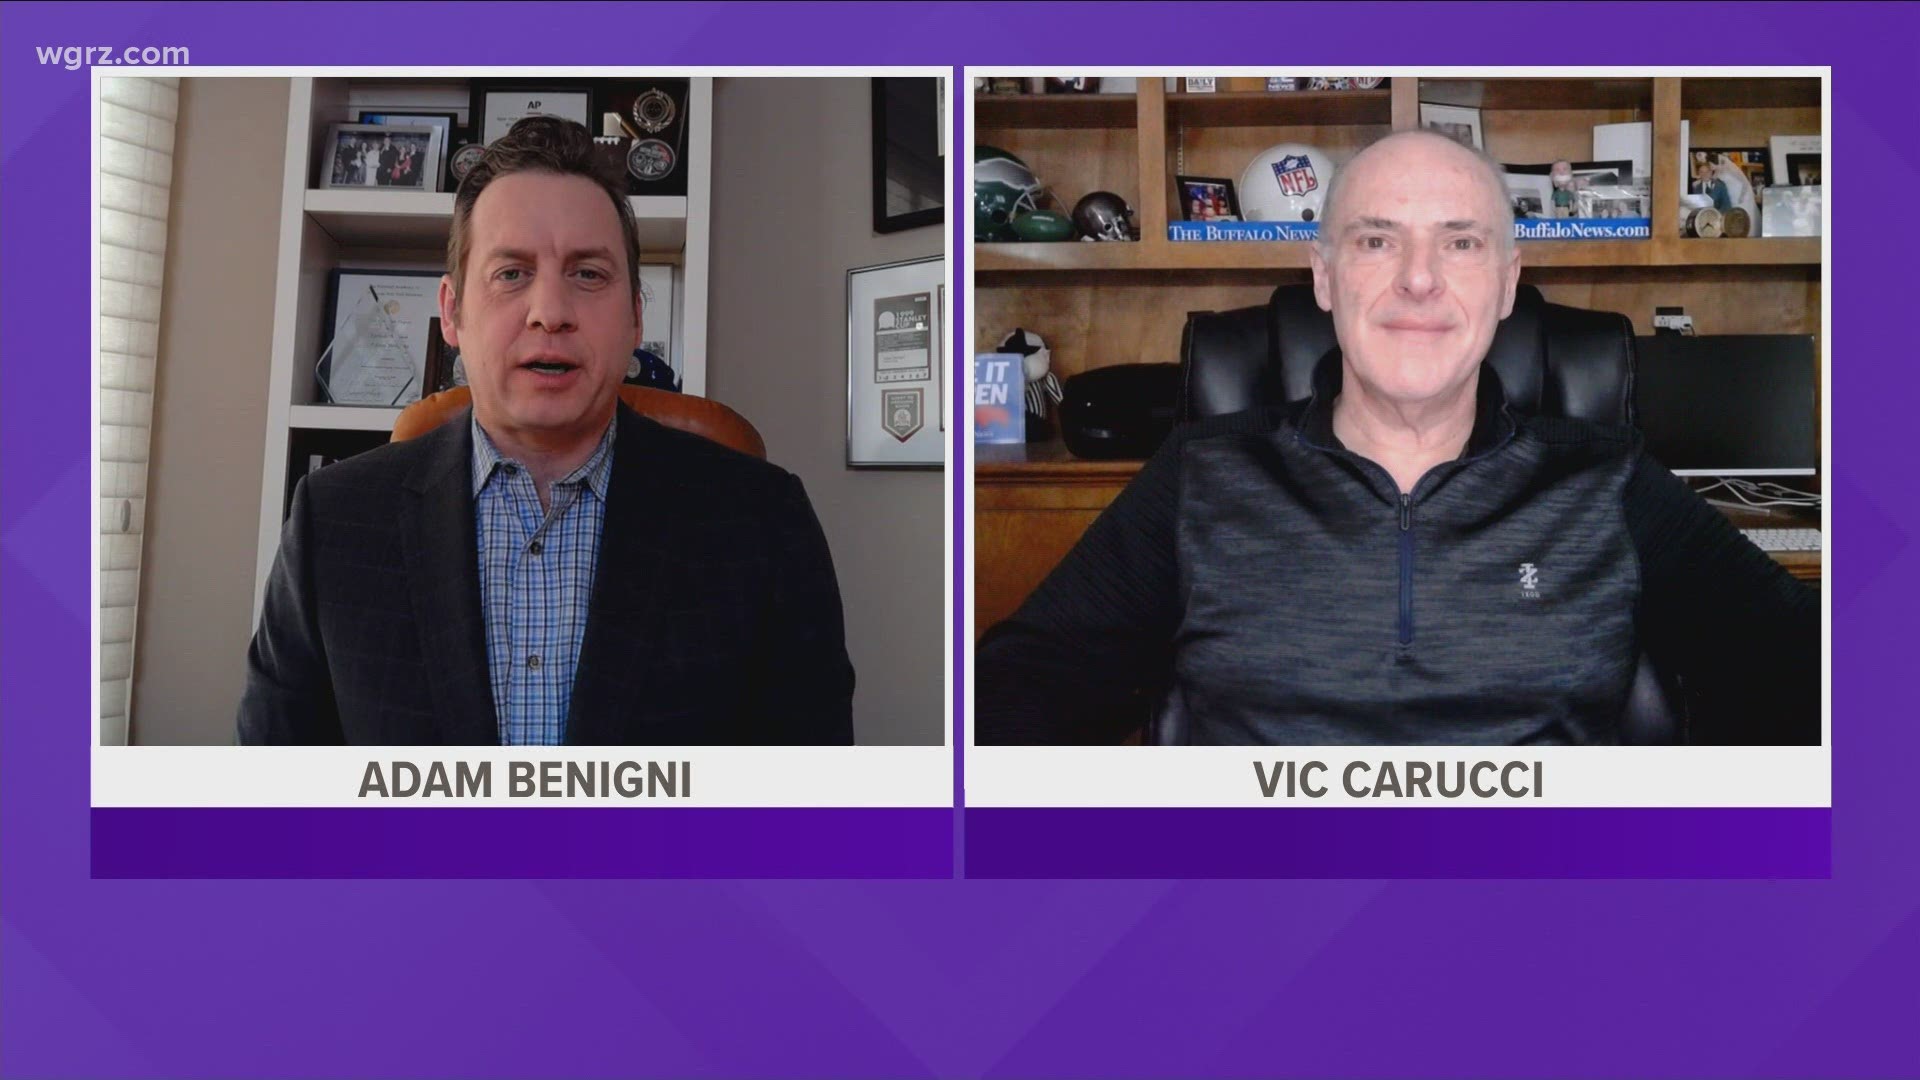 Adam Benigni and Vic Carucci joins our town hall to discuss the off season for the Buffalo Bills